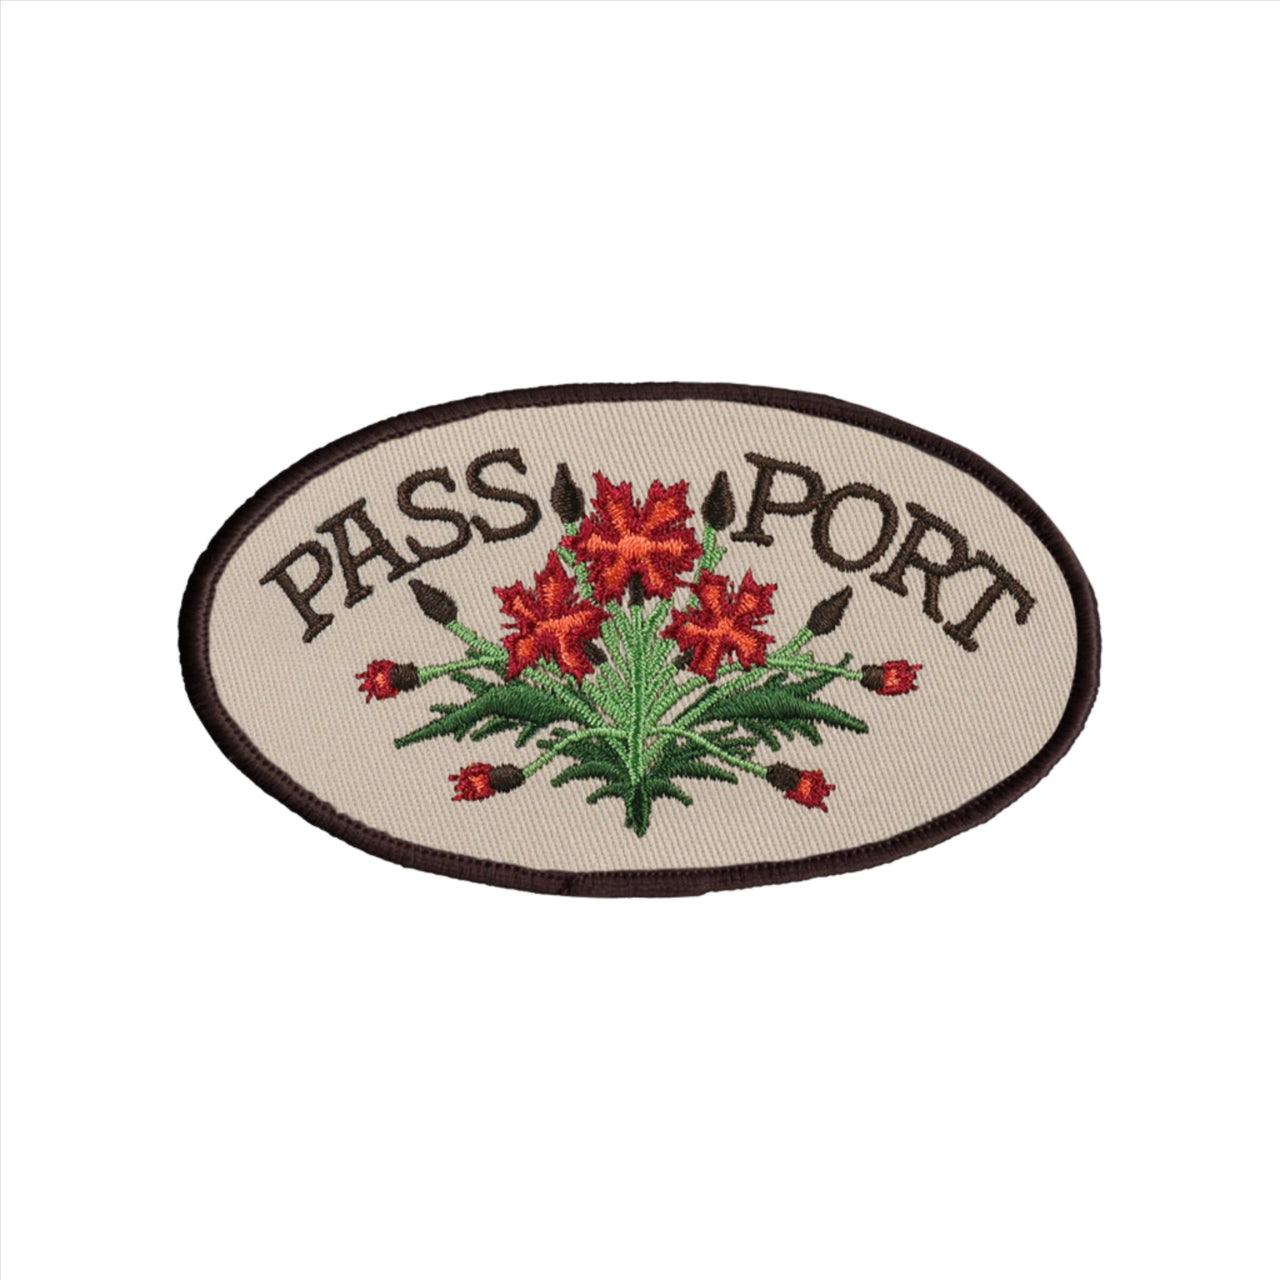 PASS~PORT - BLOOM PATCH